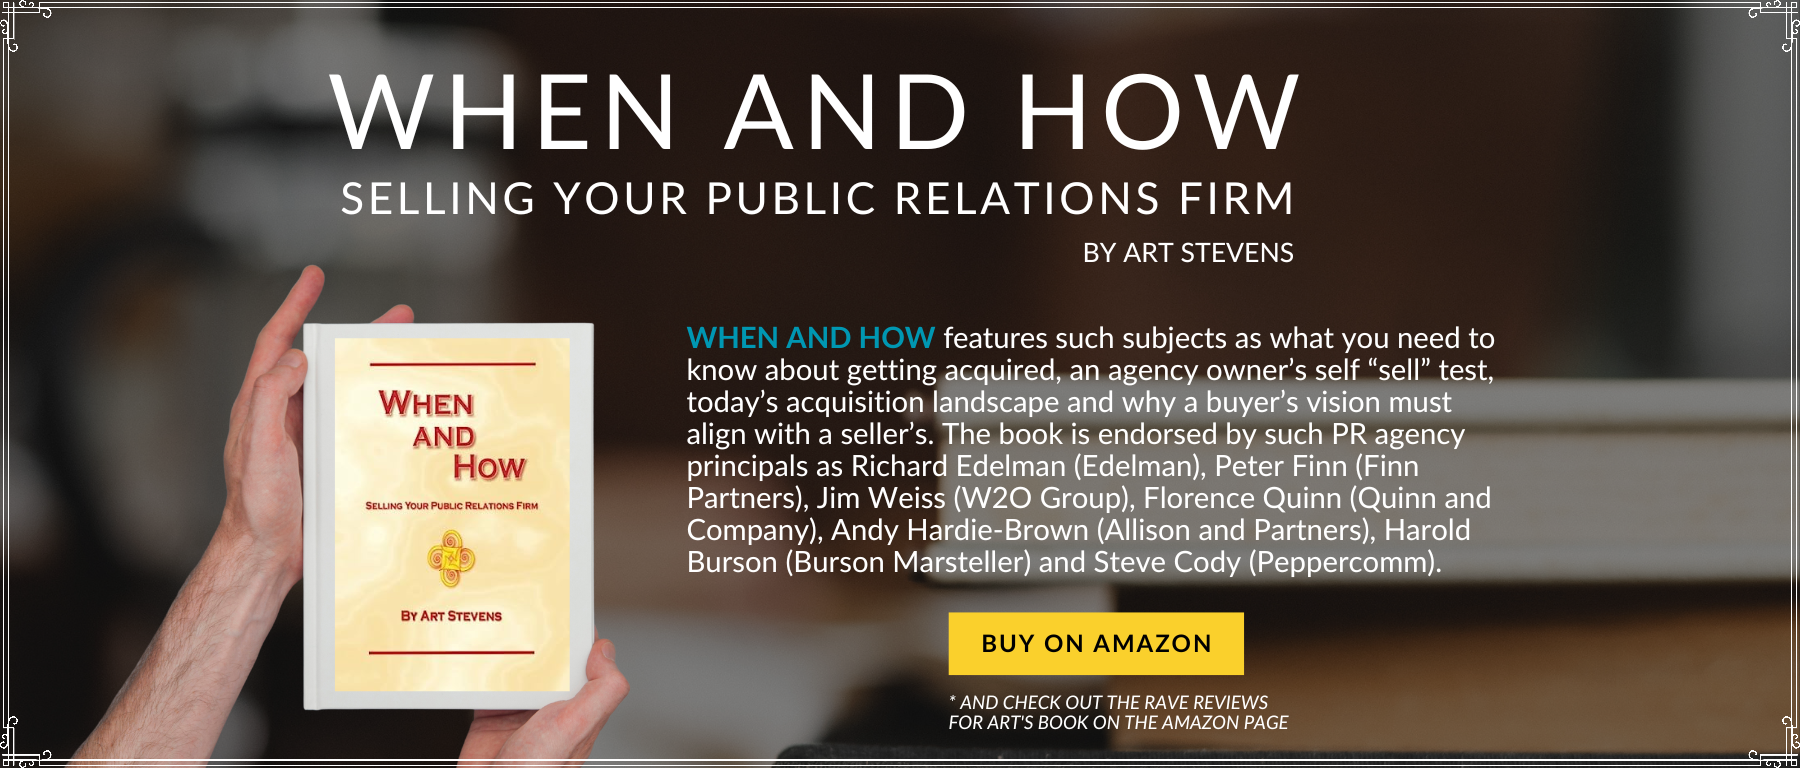 WHEN AND HOW: SELLING YOUR PUBLIC RELATIONS FIRM - A book by Art Stevens of The Stevens Group